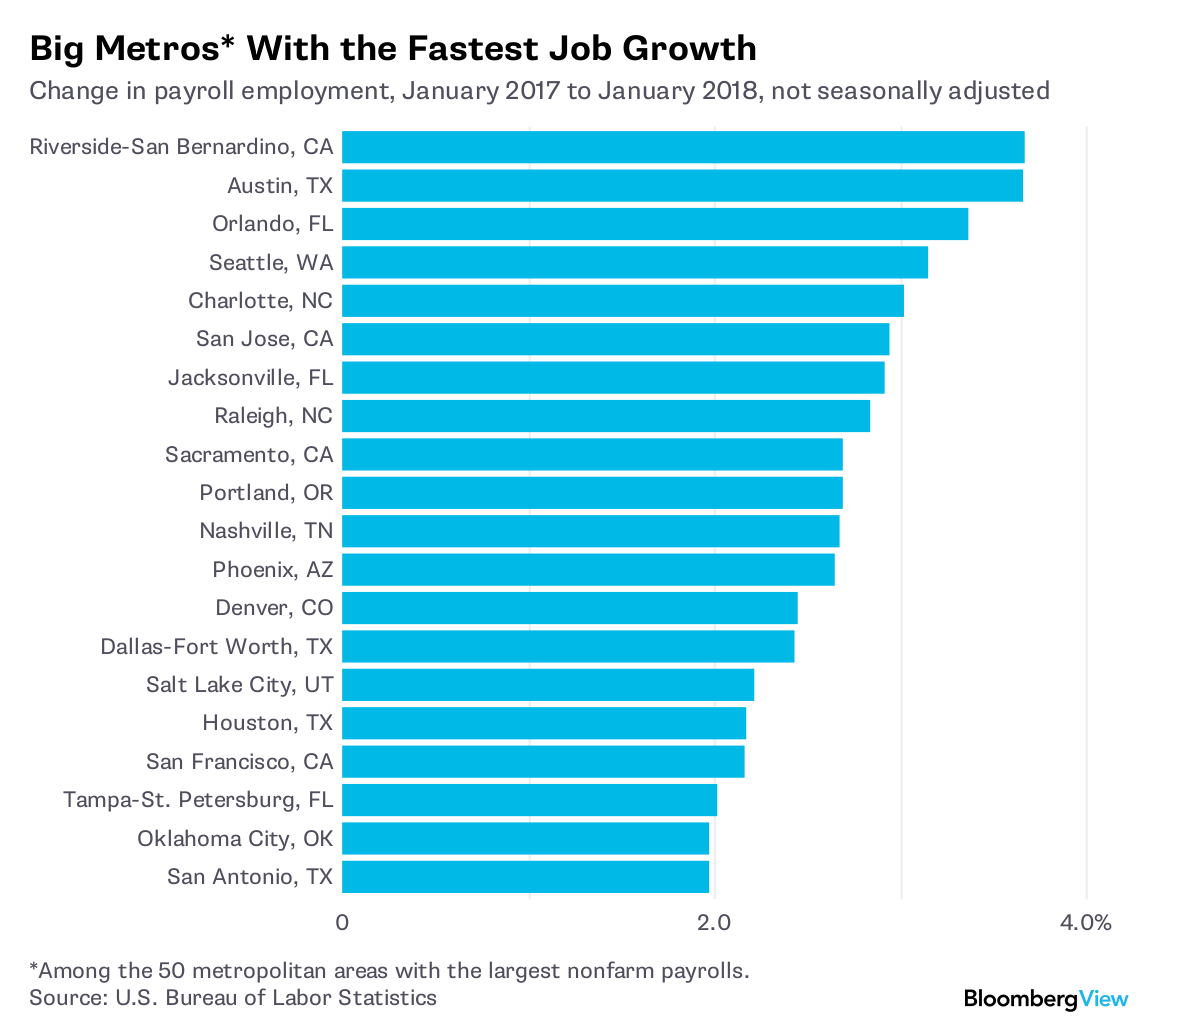 Silicon Valley Is Still Creating Lots of Good Jobs - Bloomberg